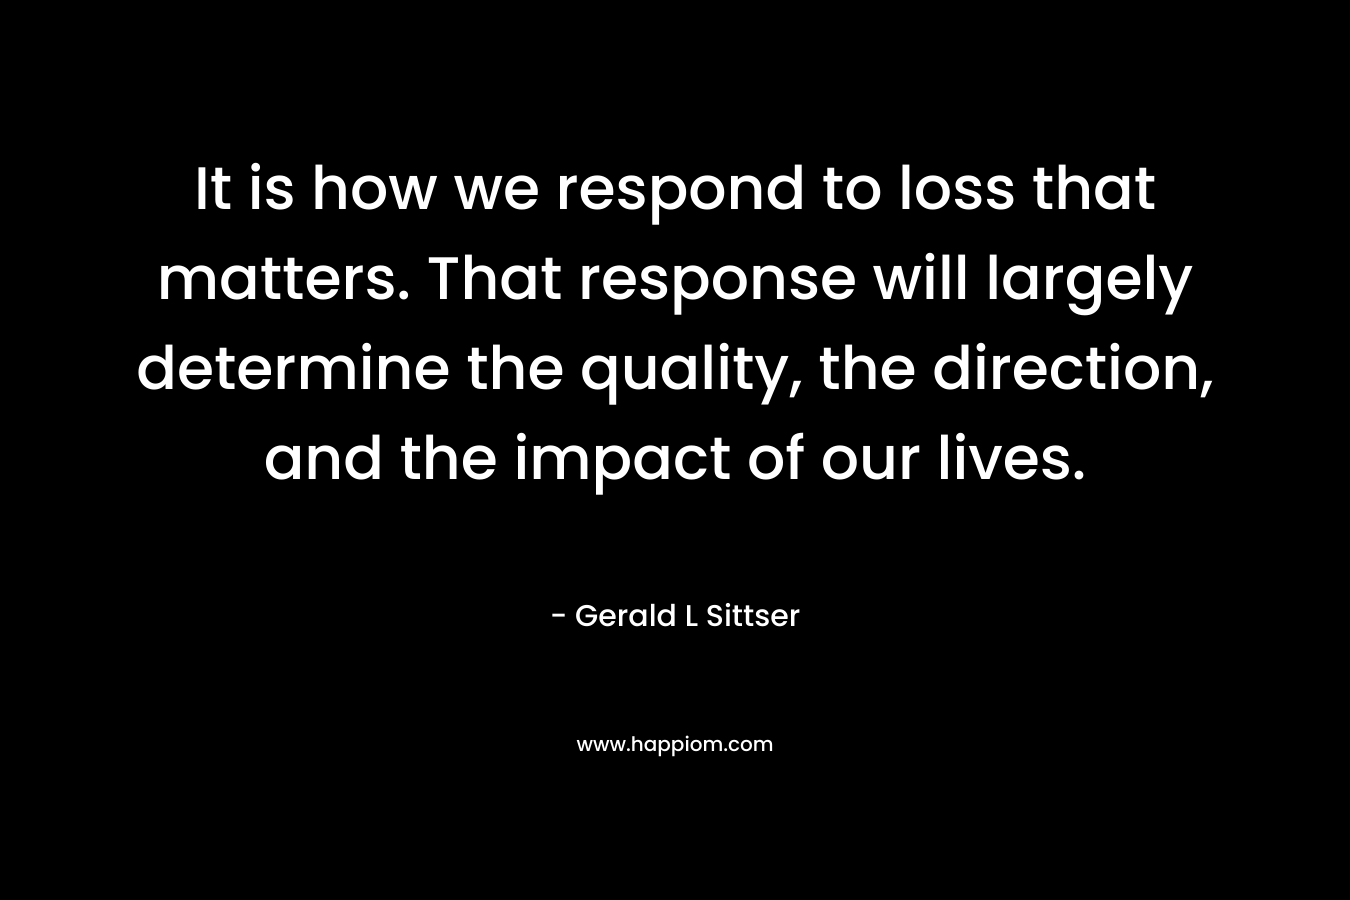 It is how we respond to loss that matters. That response will largely determine the quality, the direction, and the impact of our lives.